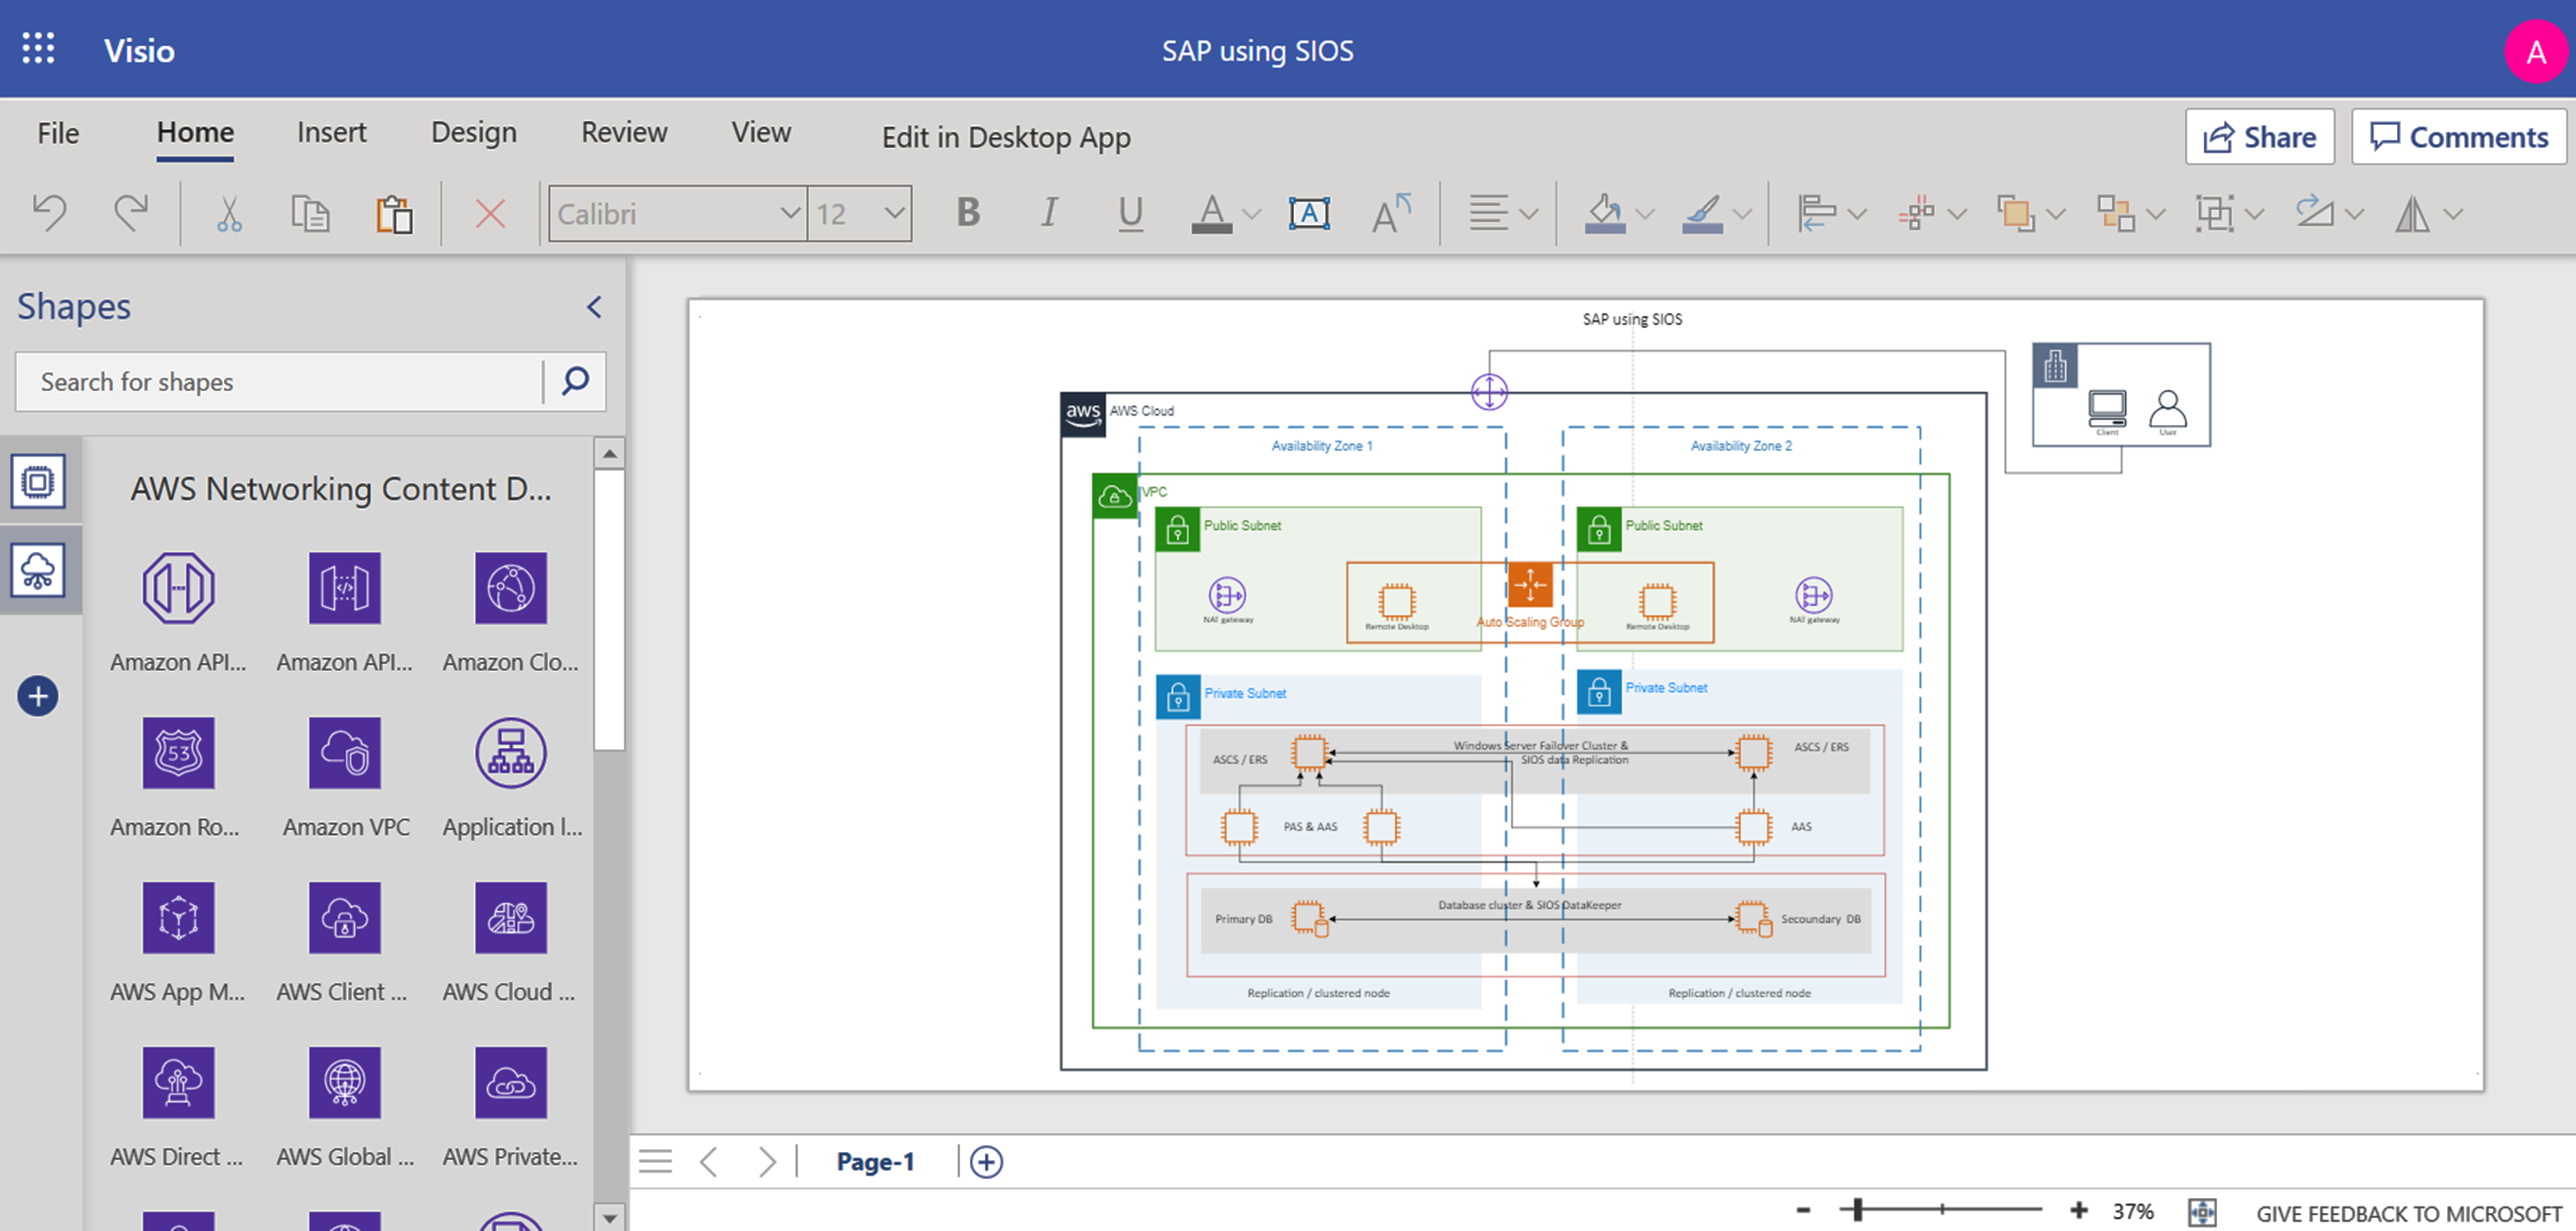 This image shows a screen shot diagram of SAP using SIOS.